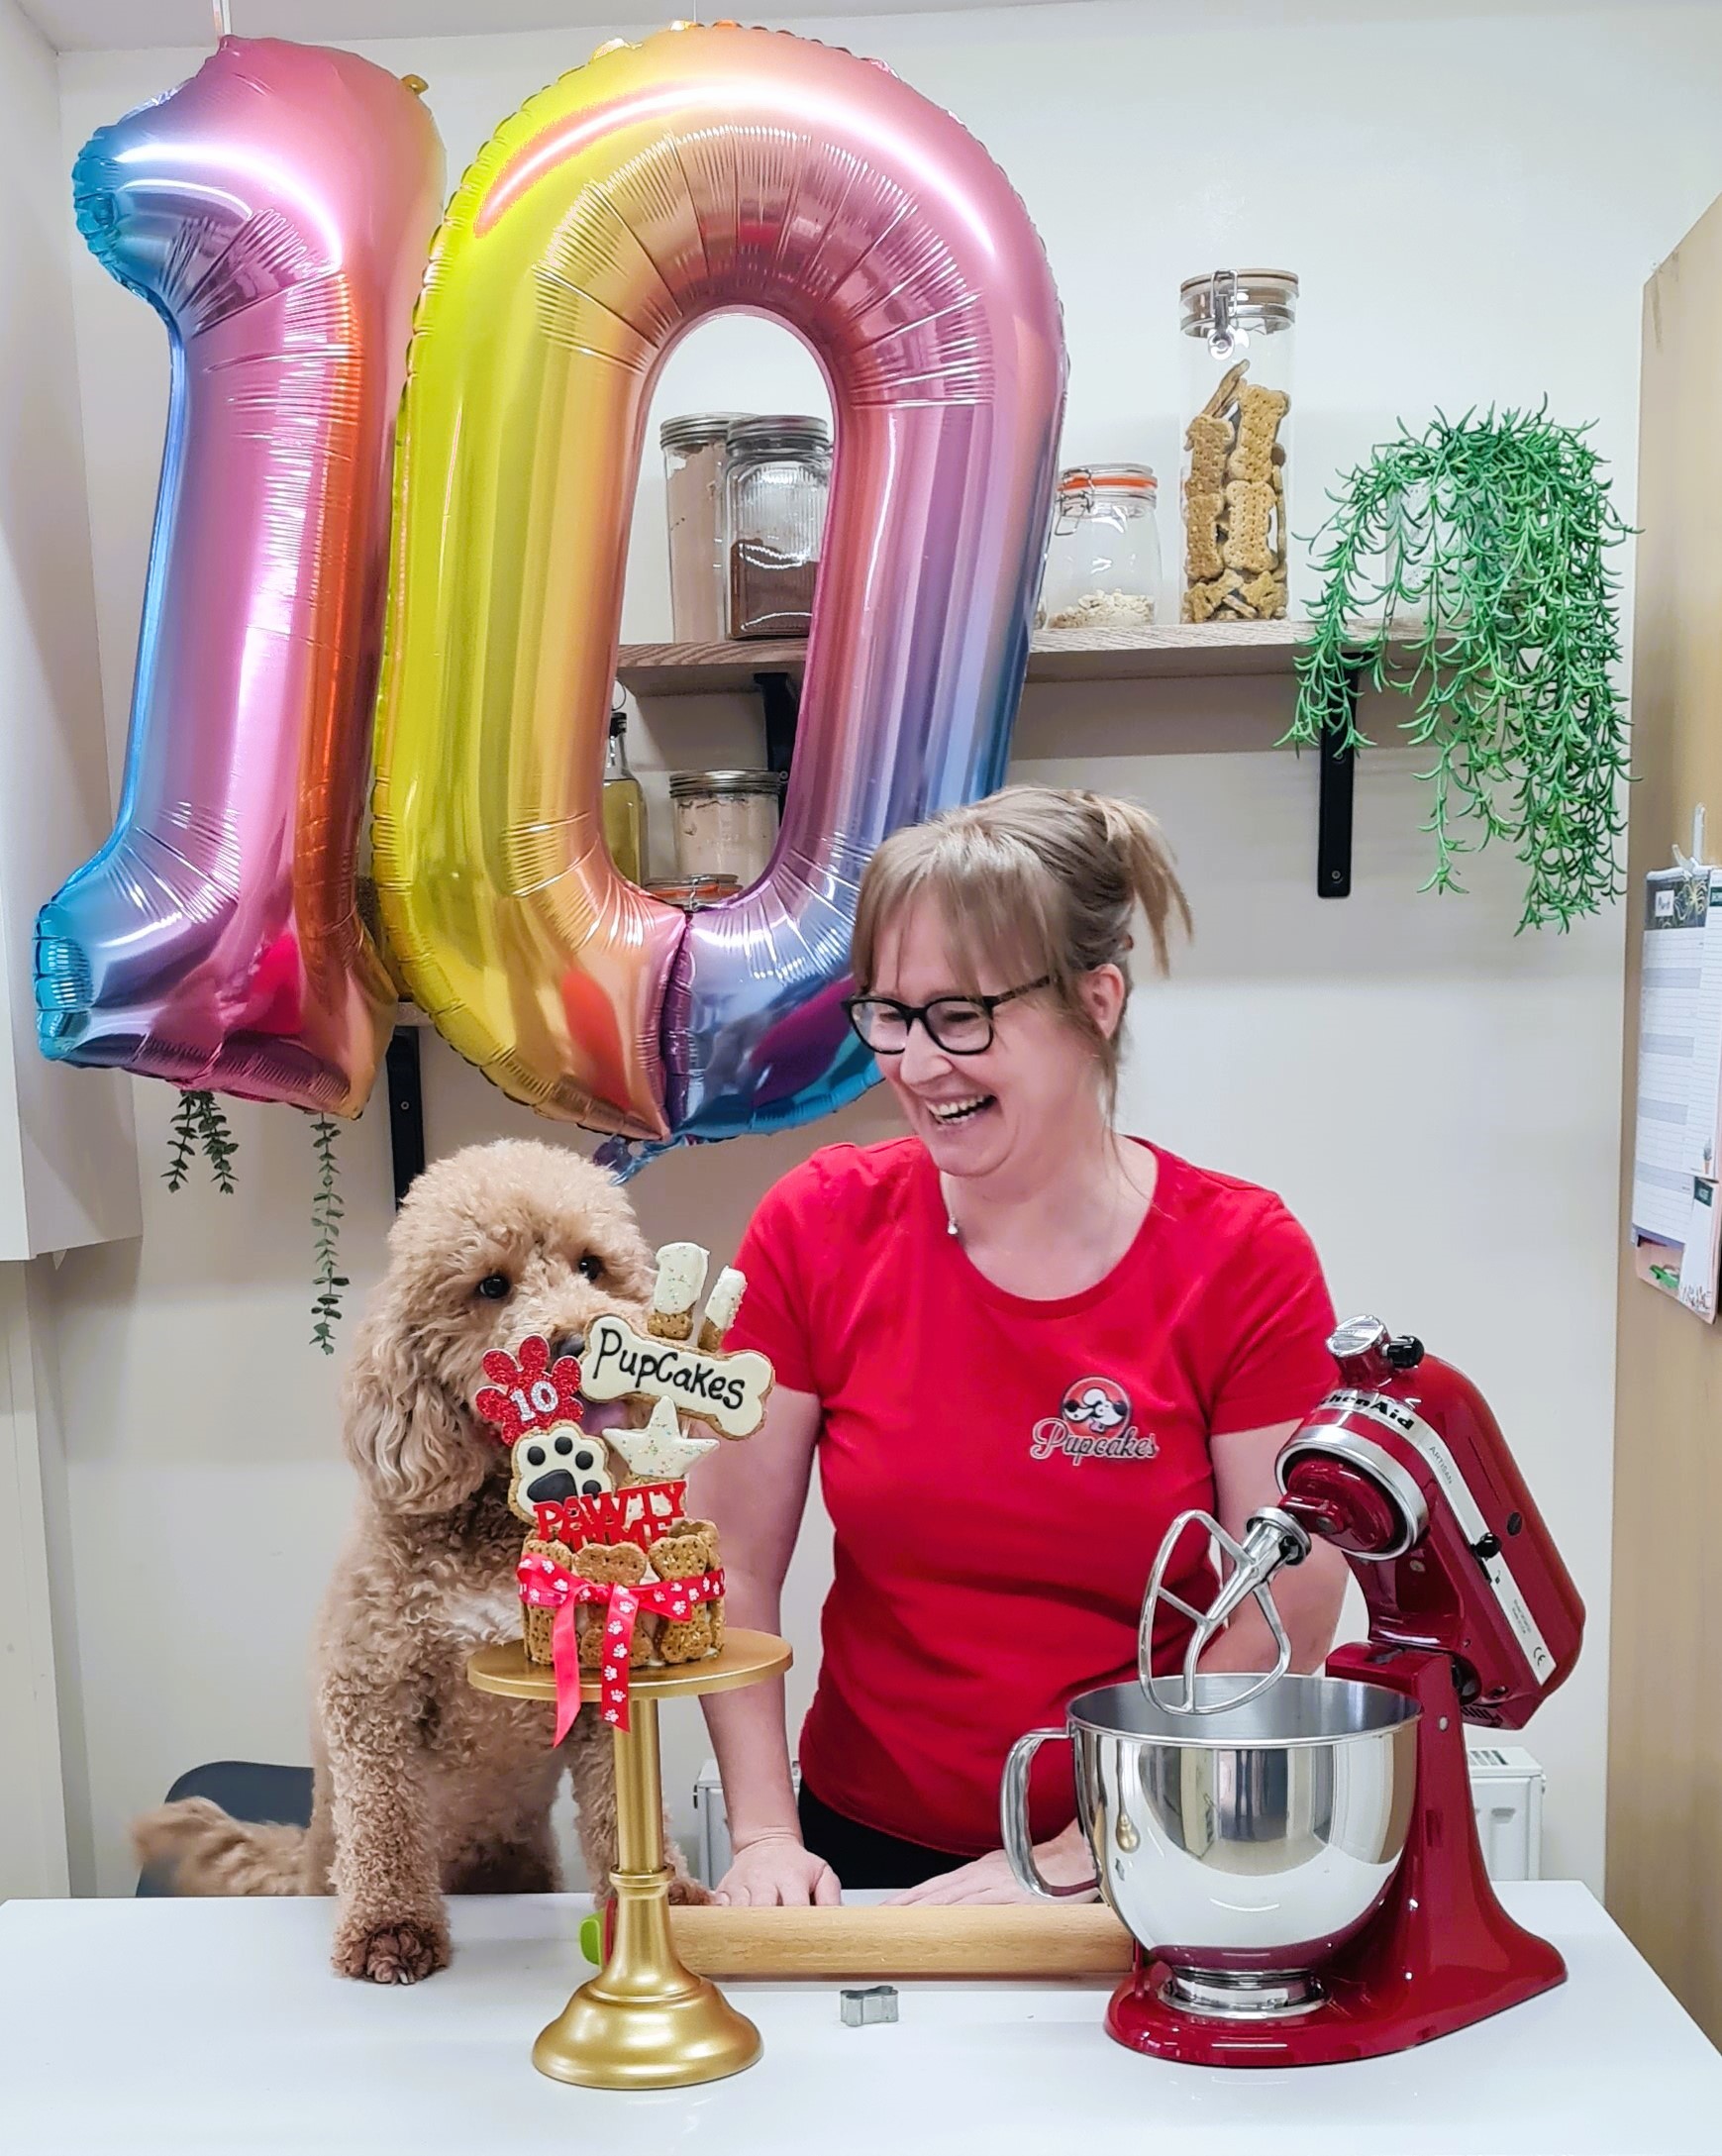 Owner of PupCakes Dog Bakery, Sharon Parry, celebrates the business 10th anniversary with her own dog Bobbi.